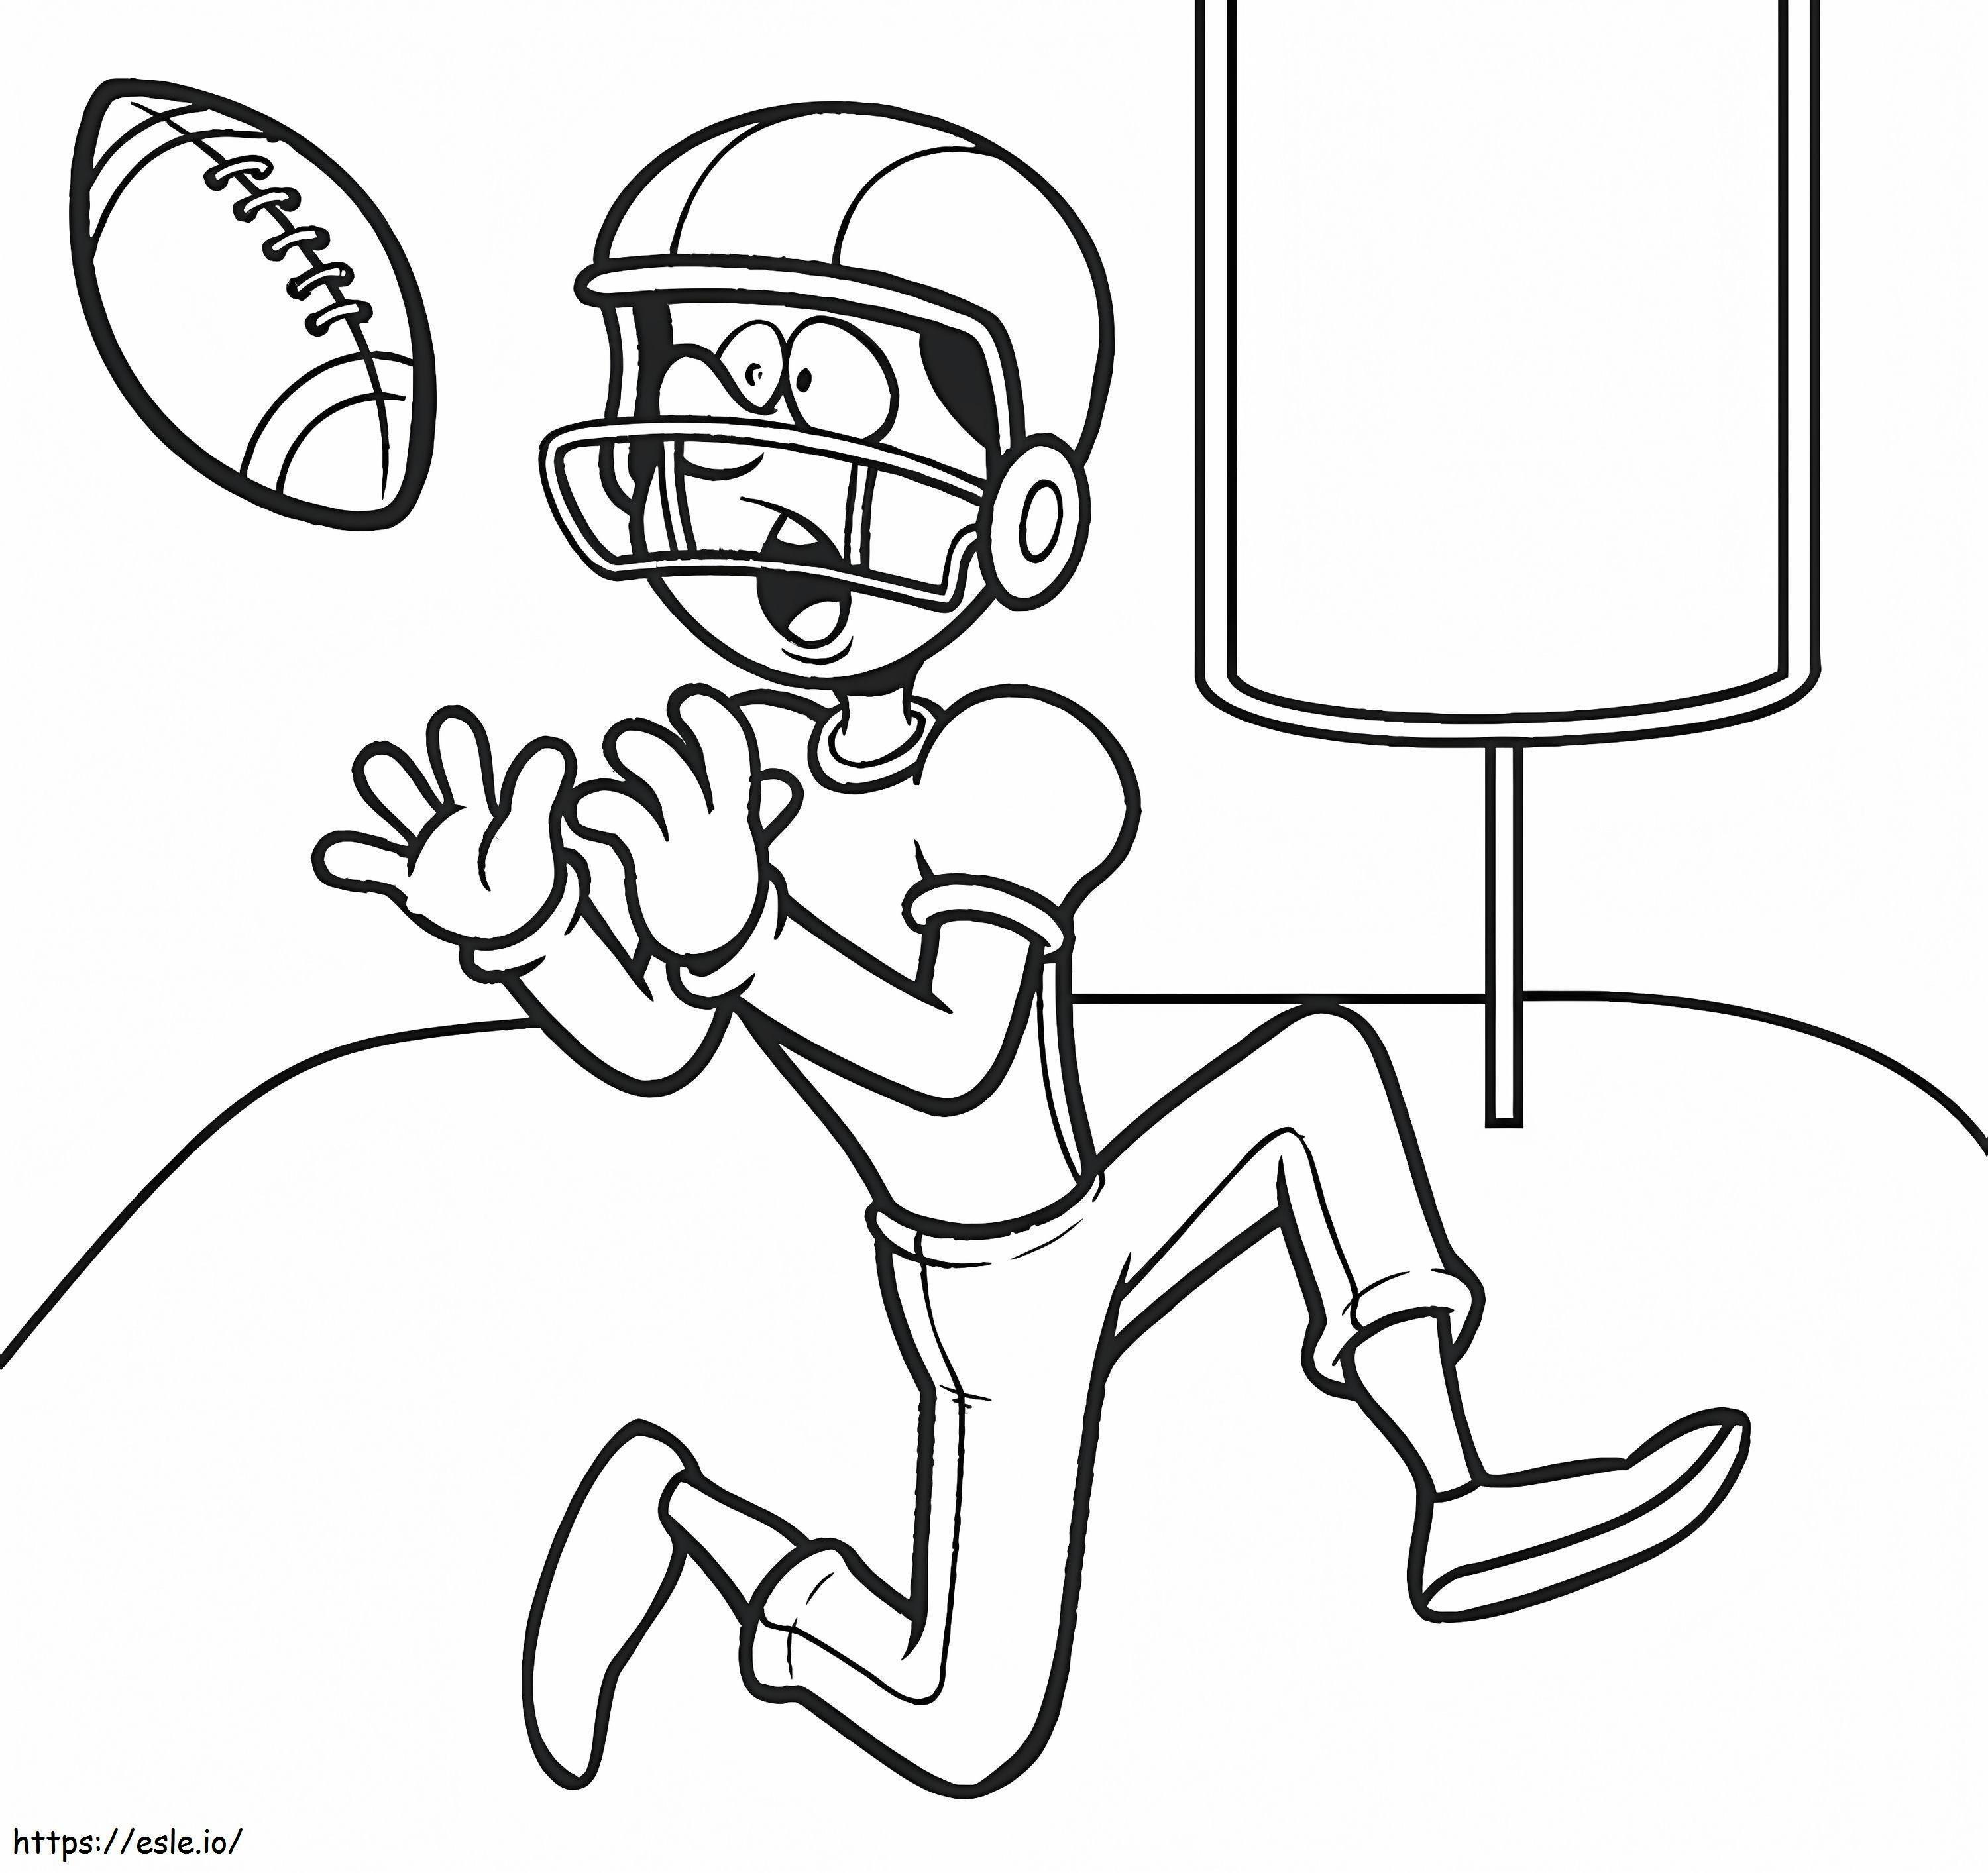 Funny Football Player coloring page